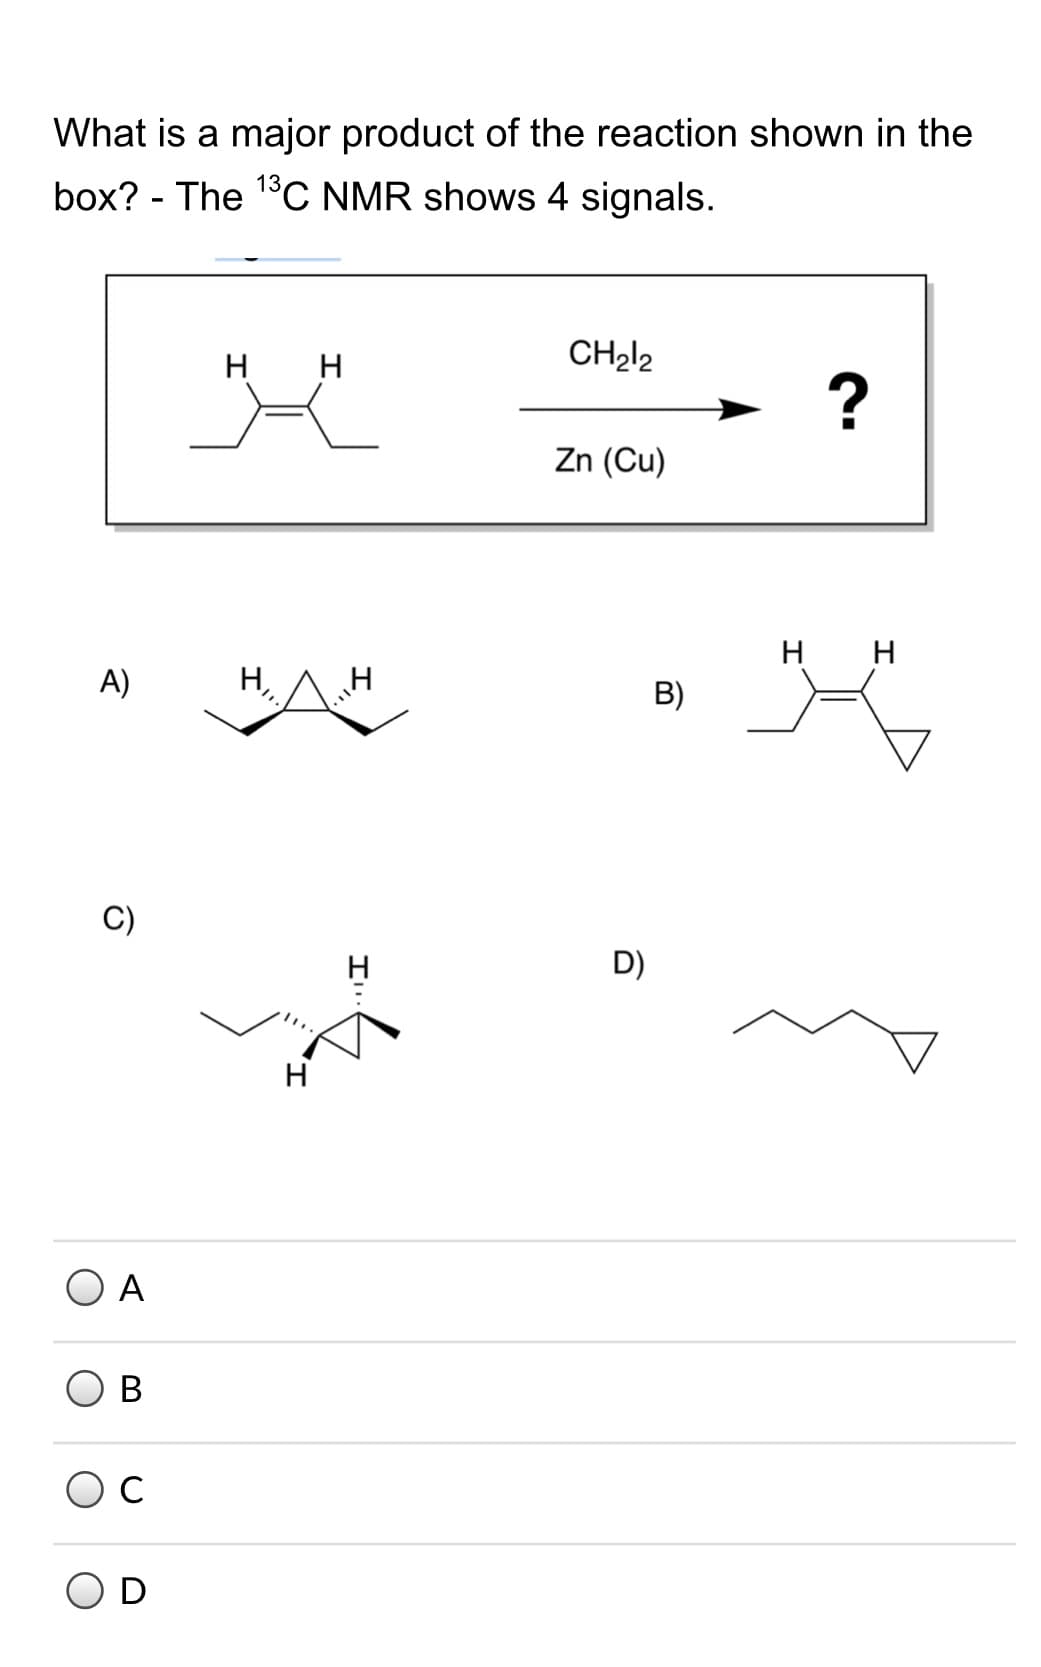 What is a major product of the reaction shown in the
box? - The 1°C NMR shows 4 signals.
H H
CH212
?
Zn (Cu
н н
A)
B)
D)
H
O A
В
D
I,
